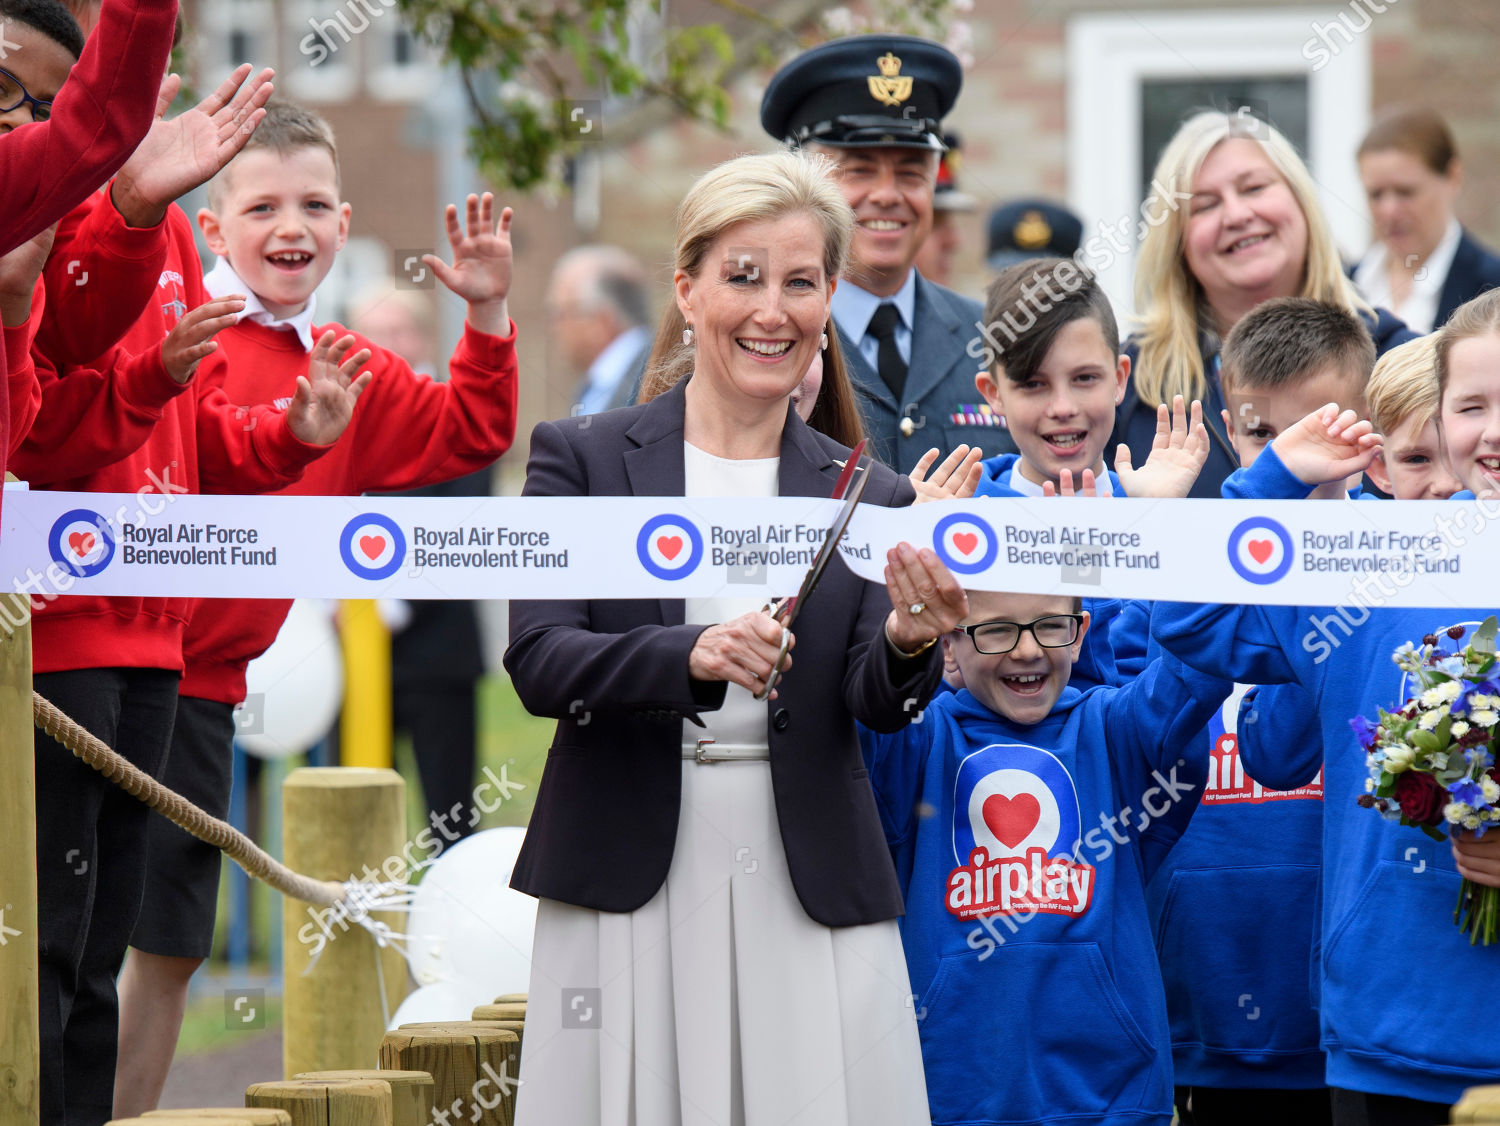 sophie-countess-of-wessex-opens-airplay-play-park-wittering-village-peterborough-uk-shutterstock-editorial-10217568w.jpg